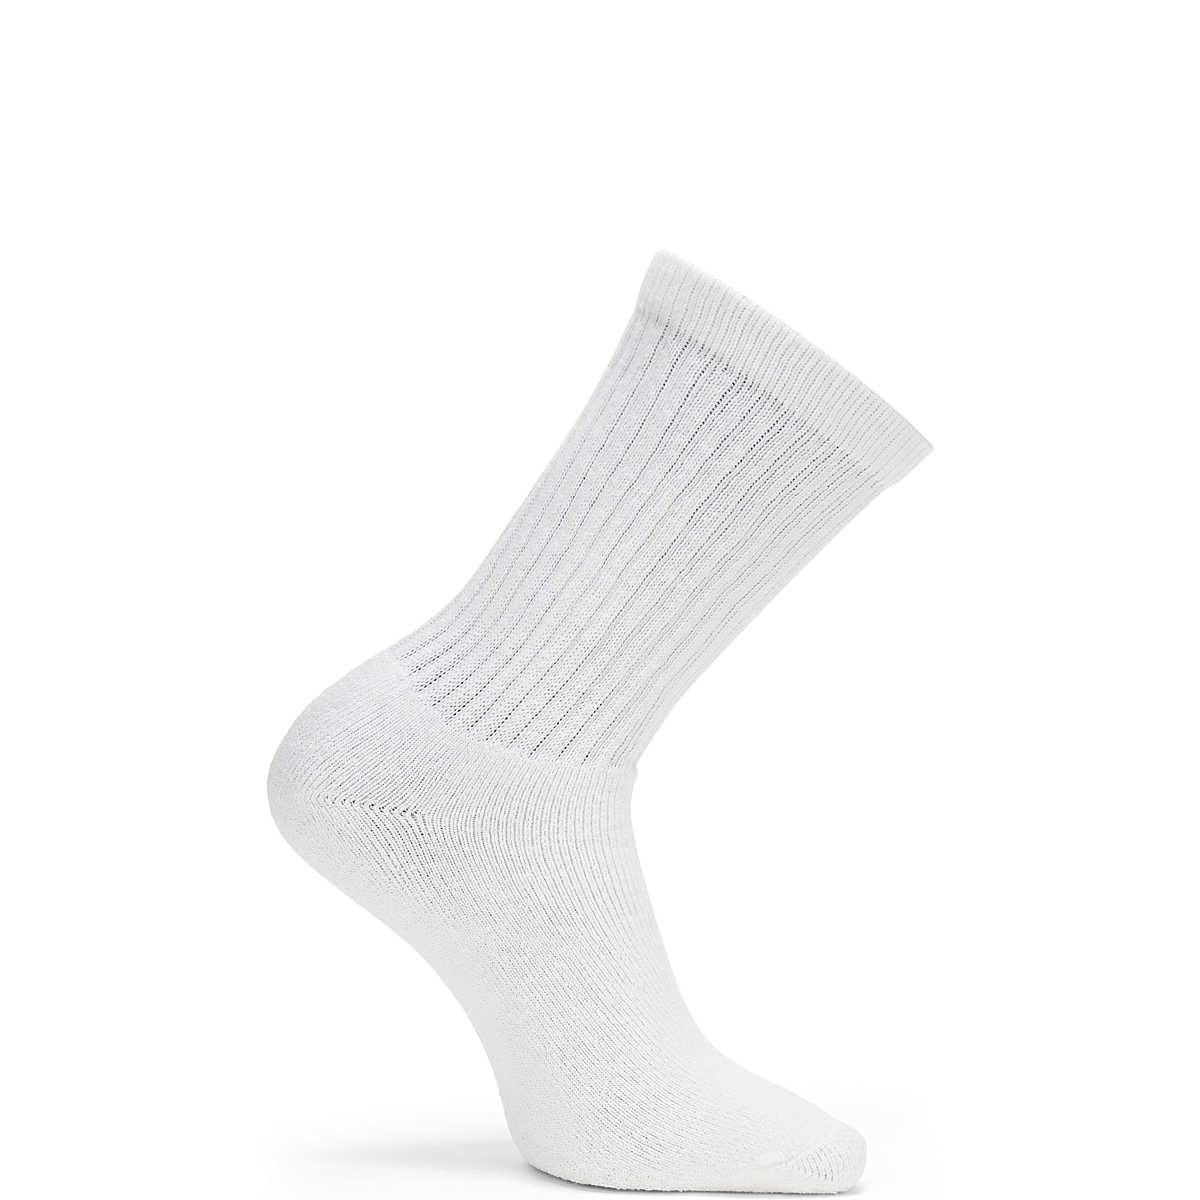 Men's 4-Pack Full Cushion Cotton Crew Sock - White - Purpose-Built / Home of the Trades